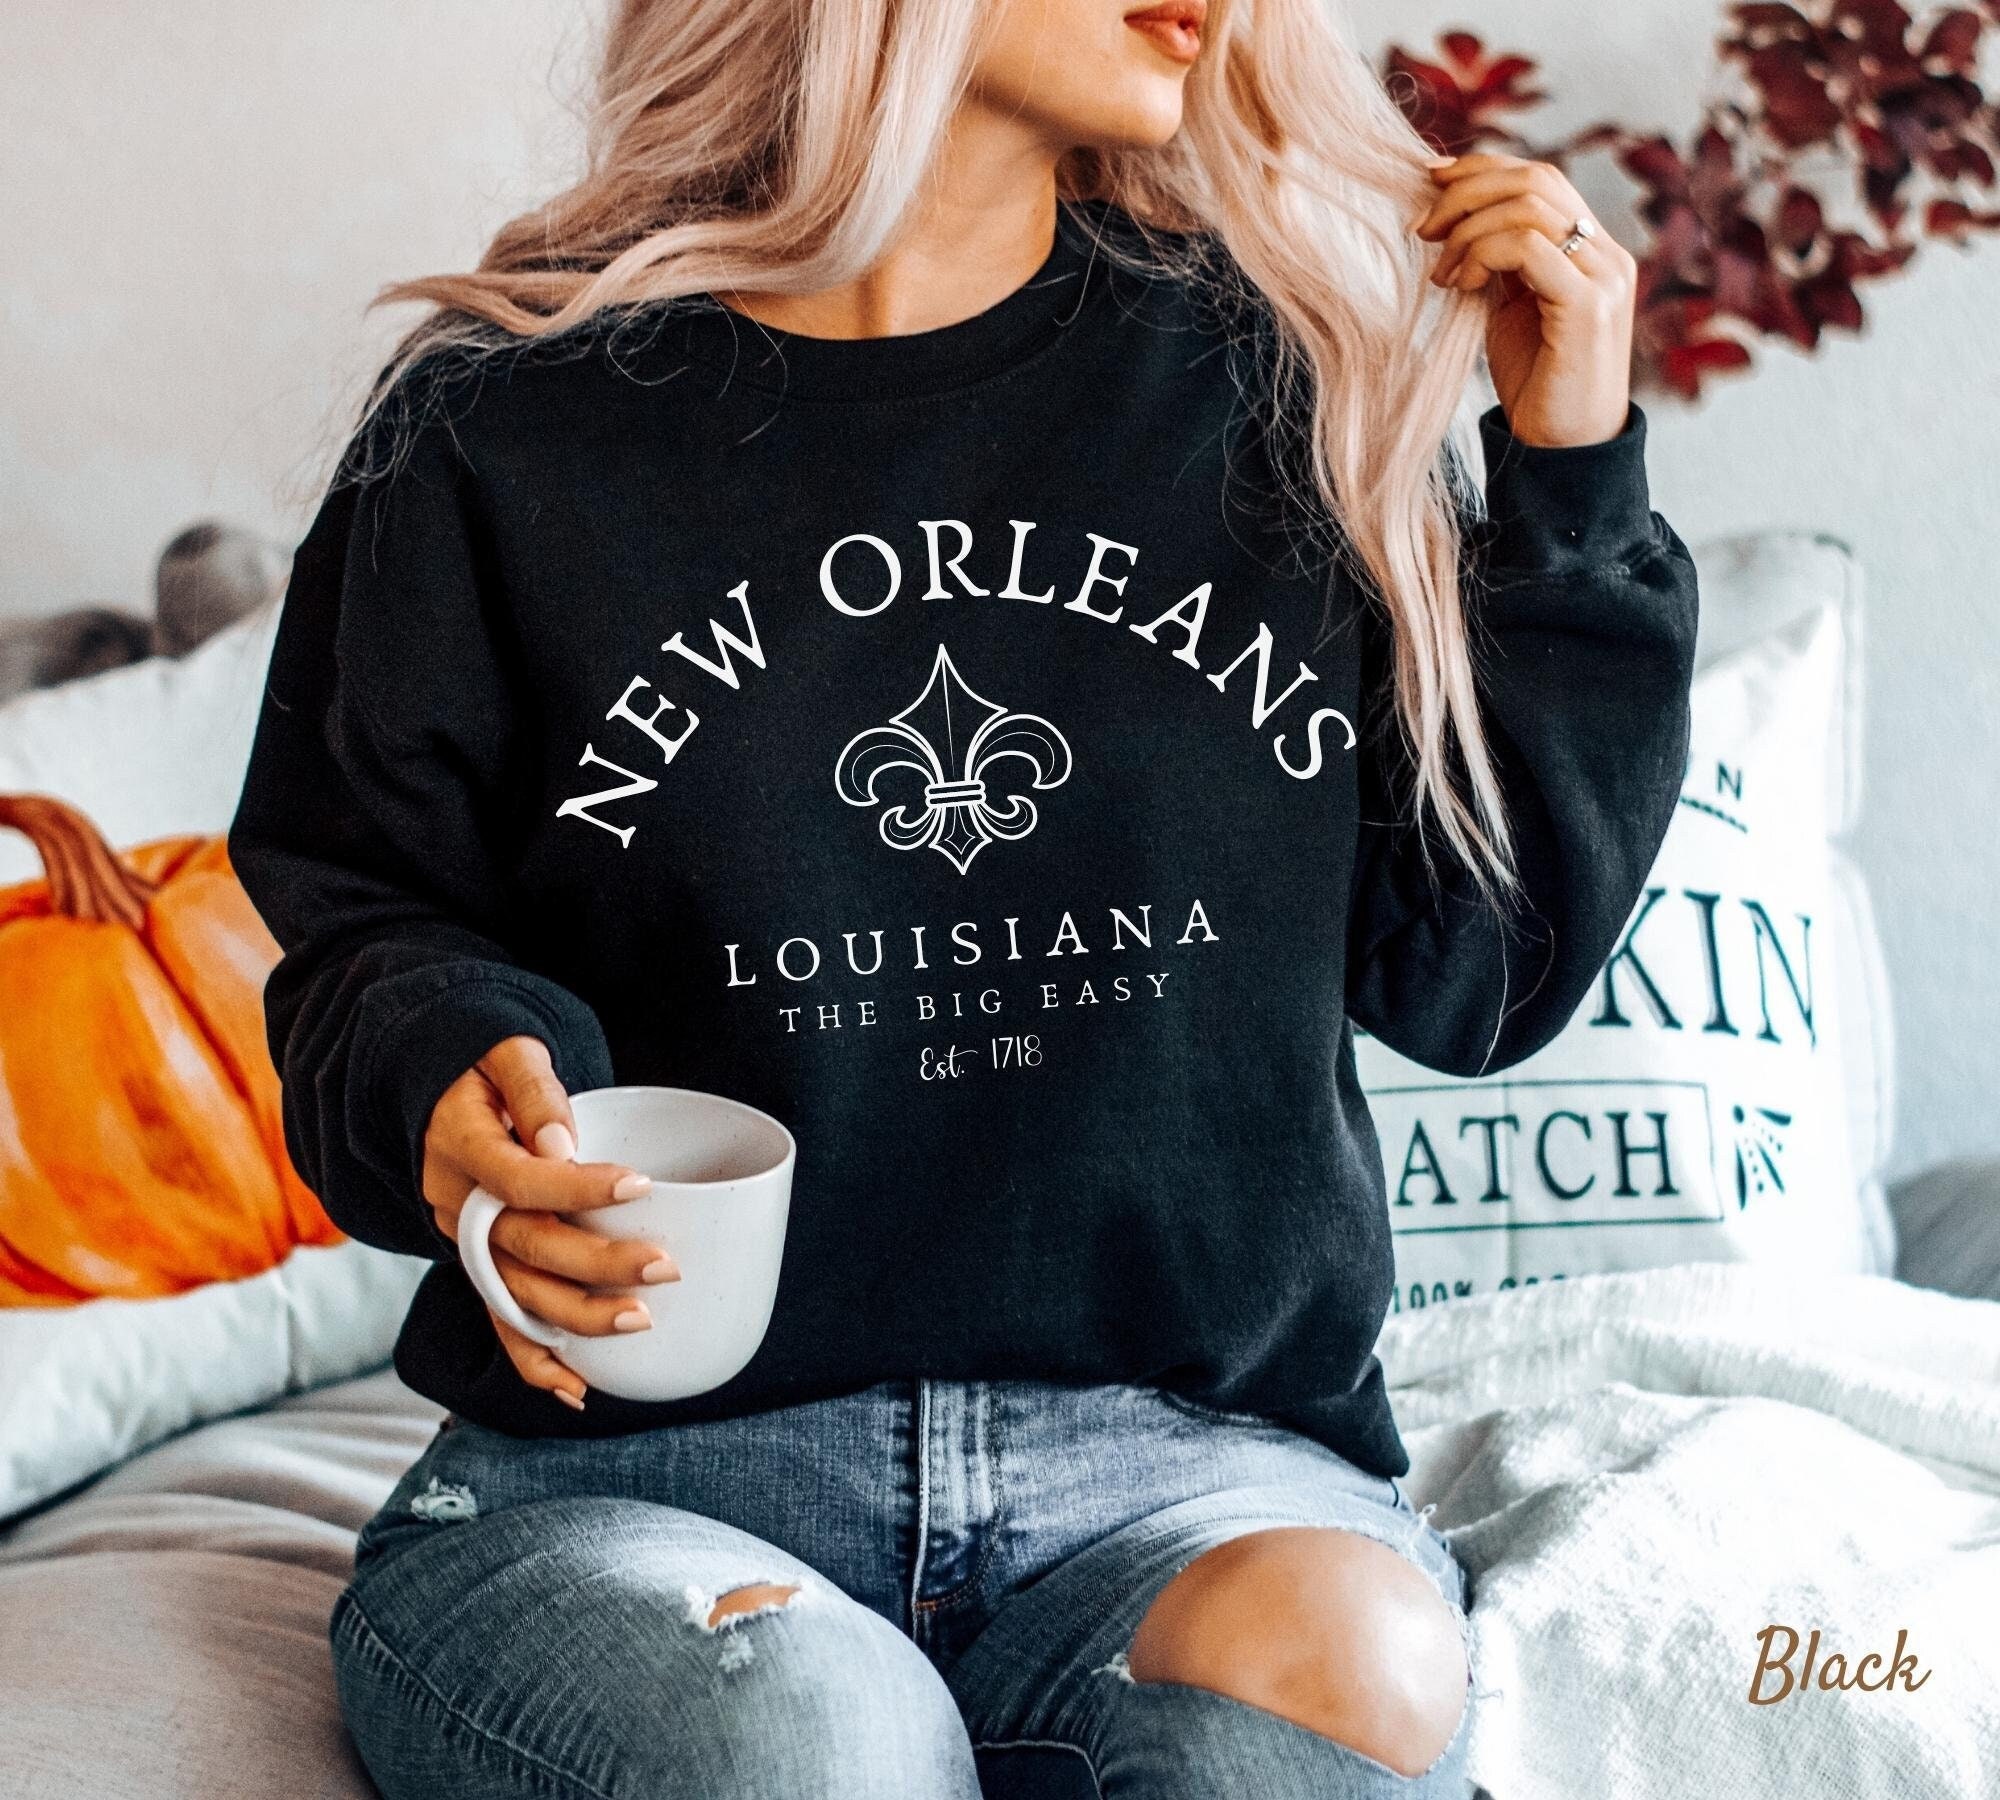 LittleSwanCrafts New Orleans Sweatshirt, The Big Easy, Unisex Soft and Comfortable Crewneck Pullover